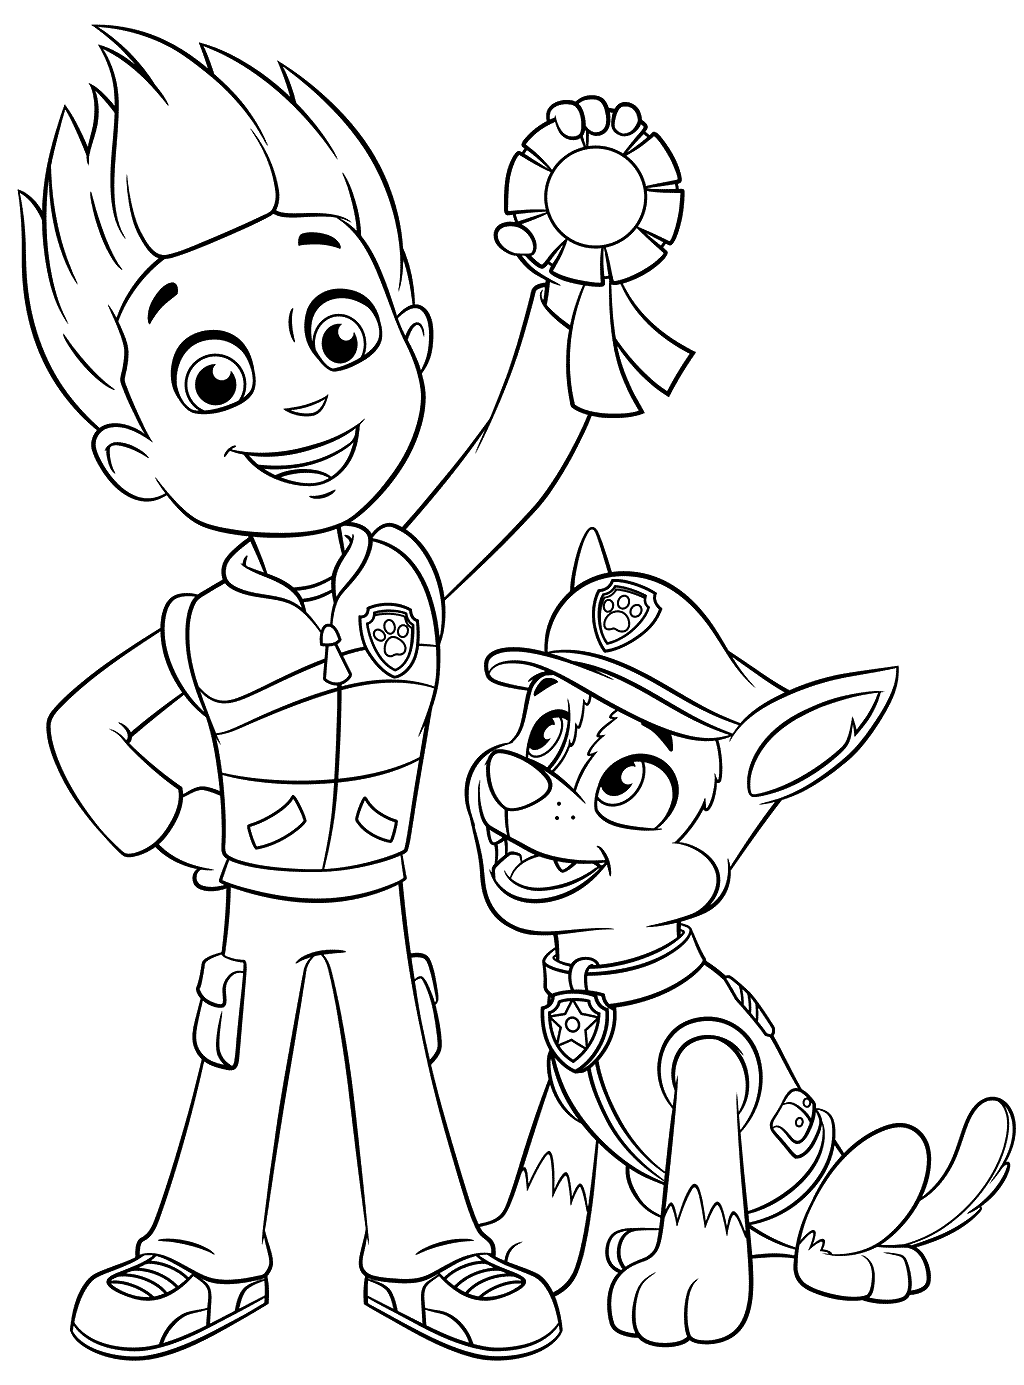 Paw Patrol Ryder And Chase Coloring Page